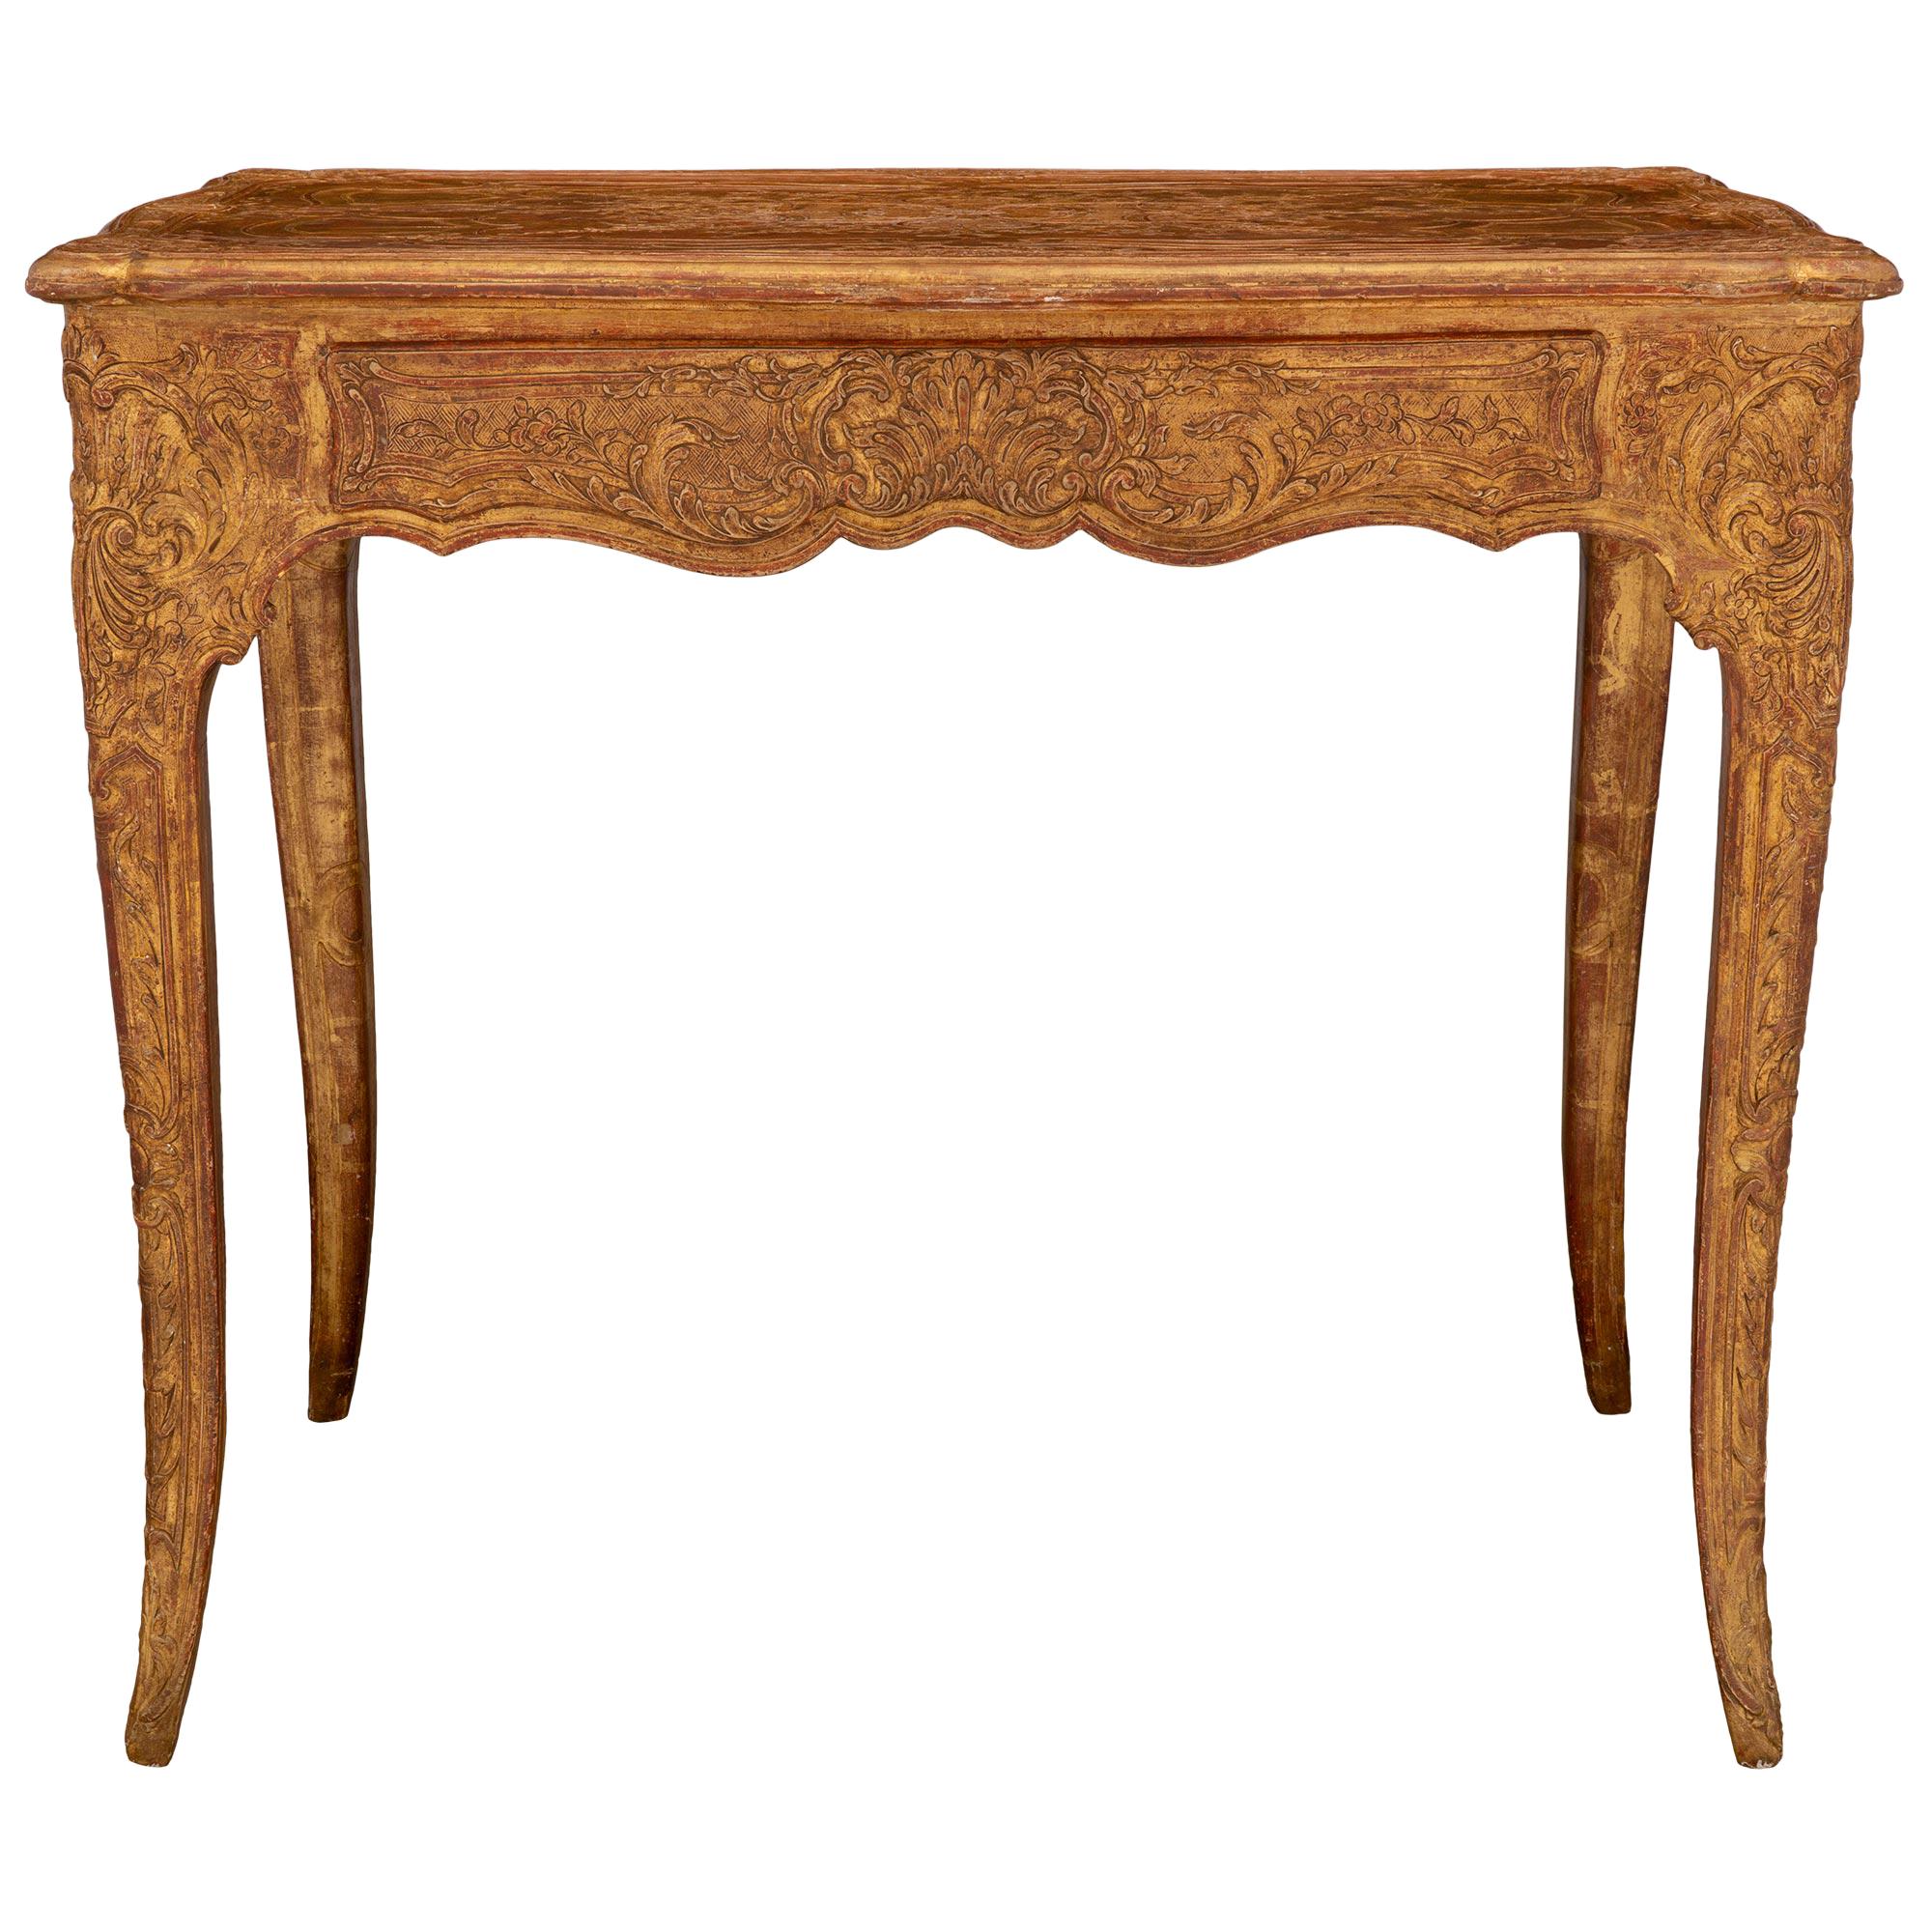 French 18th Century Louis XV Period Giltwood Side Table